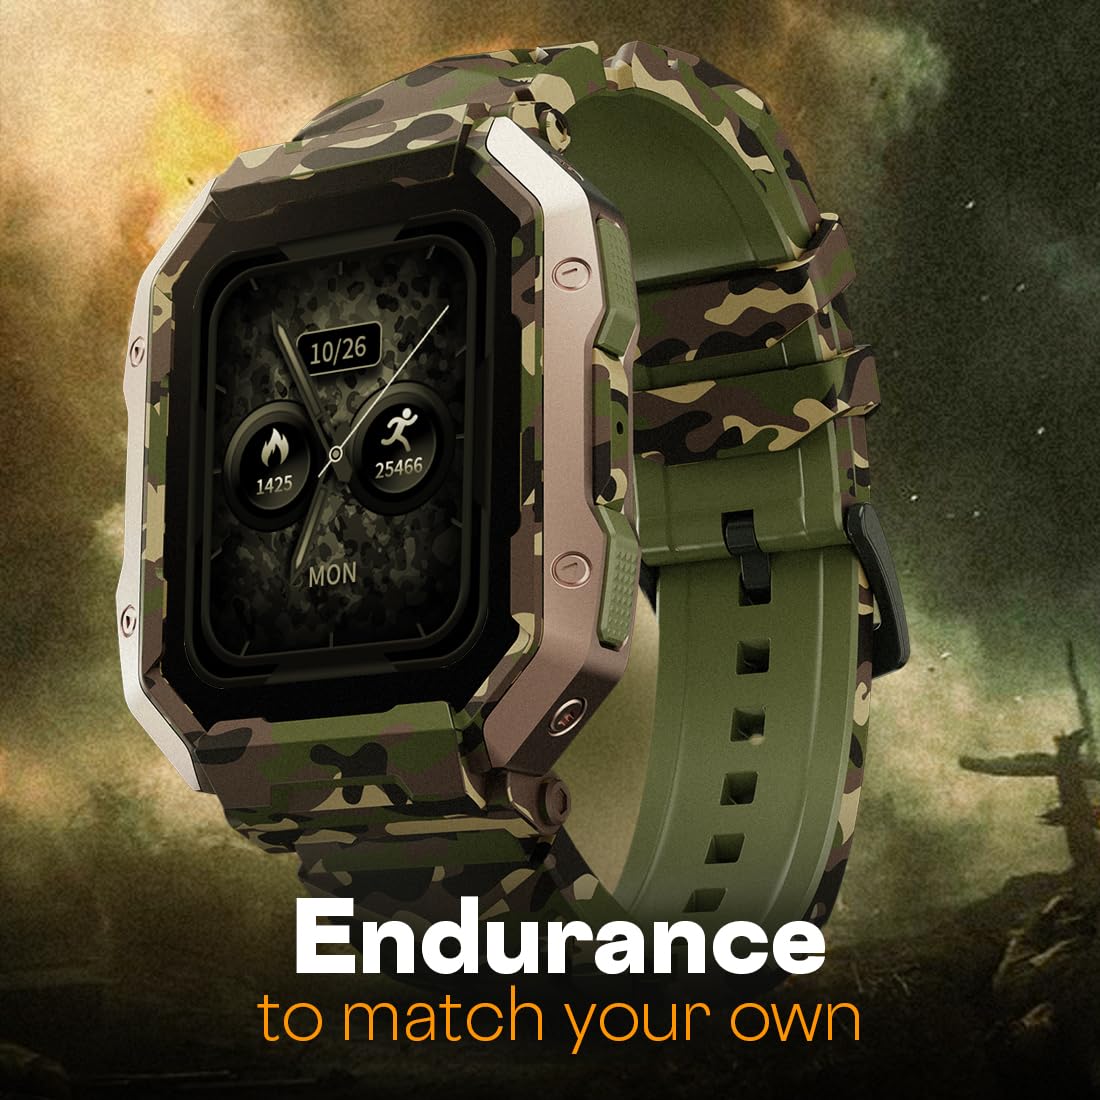 Fire-Boltt Cobra Rugged smartwatch Online at Lowest Price in India